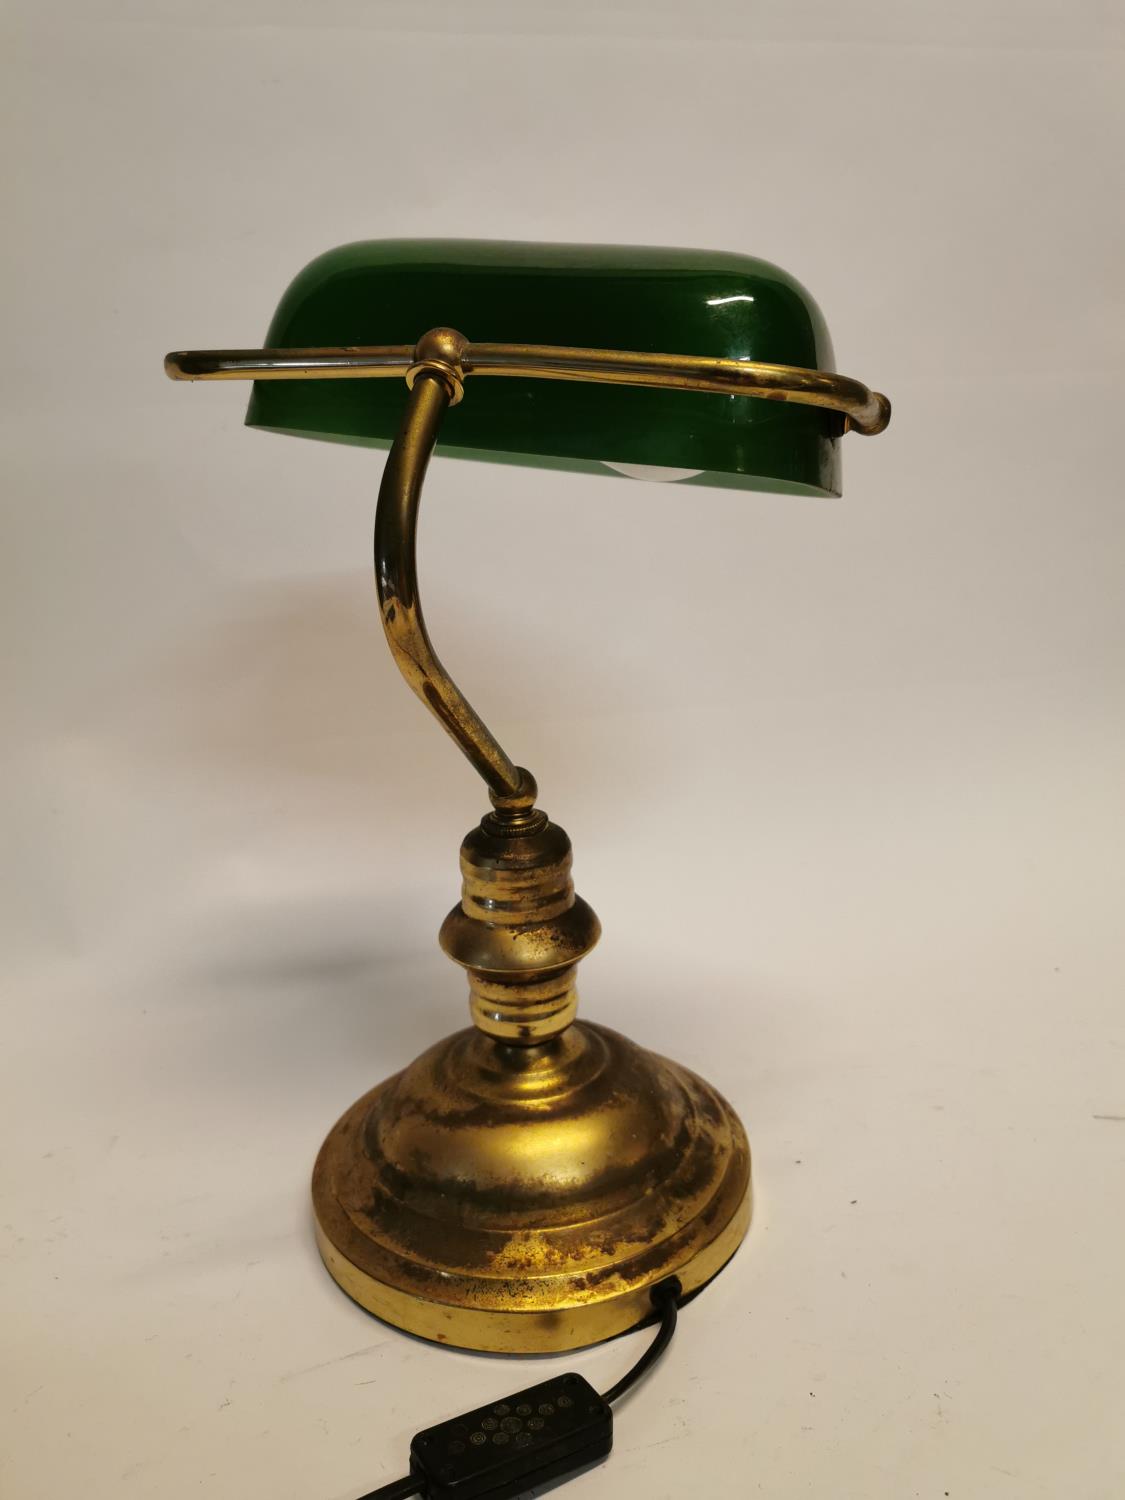 Brass desk lamp with green glass shade {37 cm H x 26 cm W x 22 cm D}. - Image 2 of 2